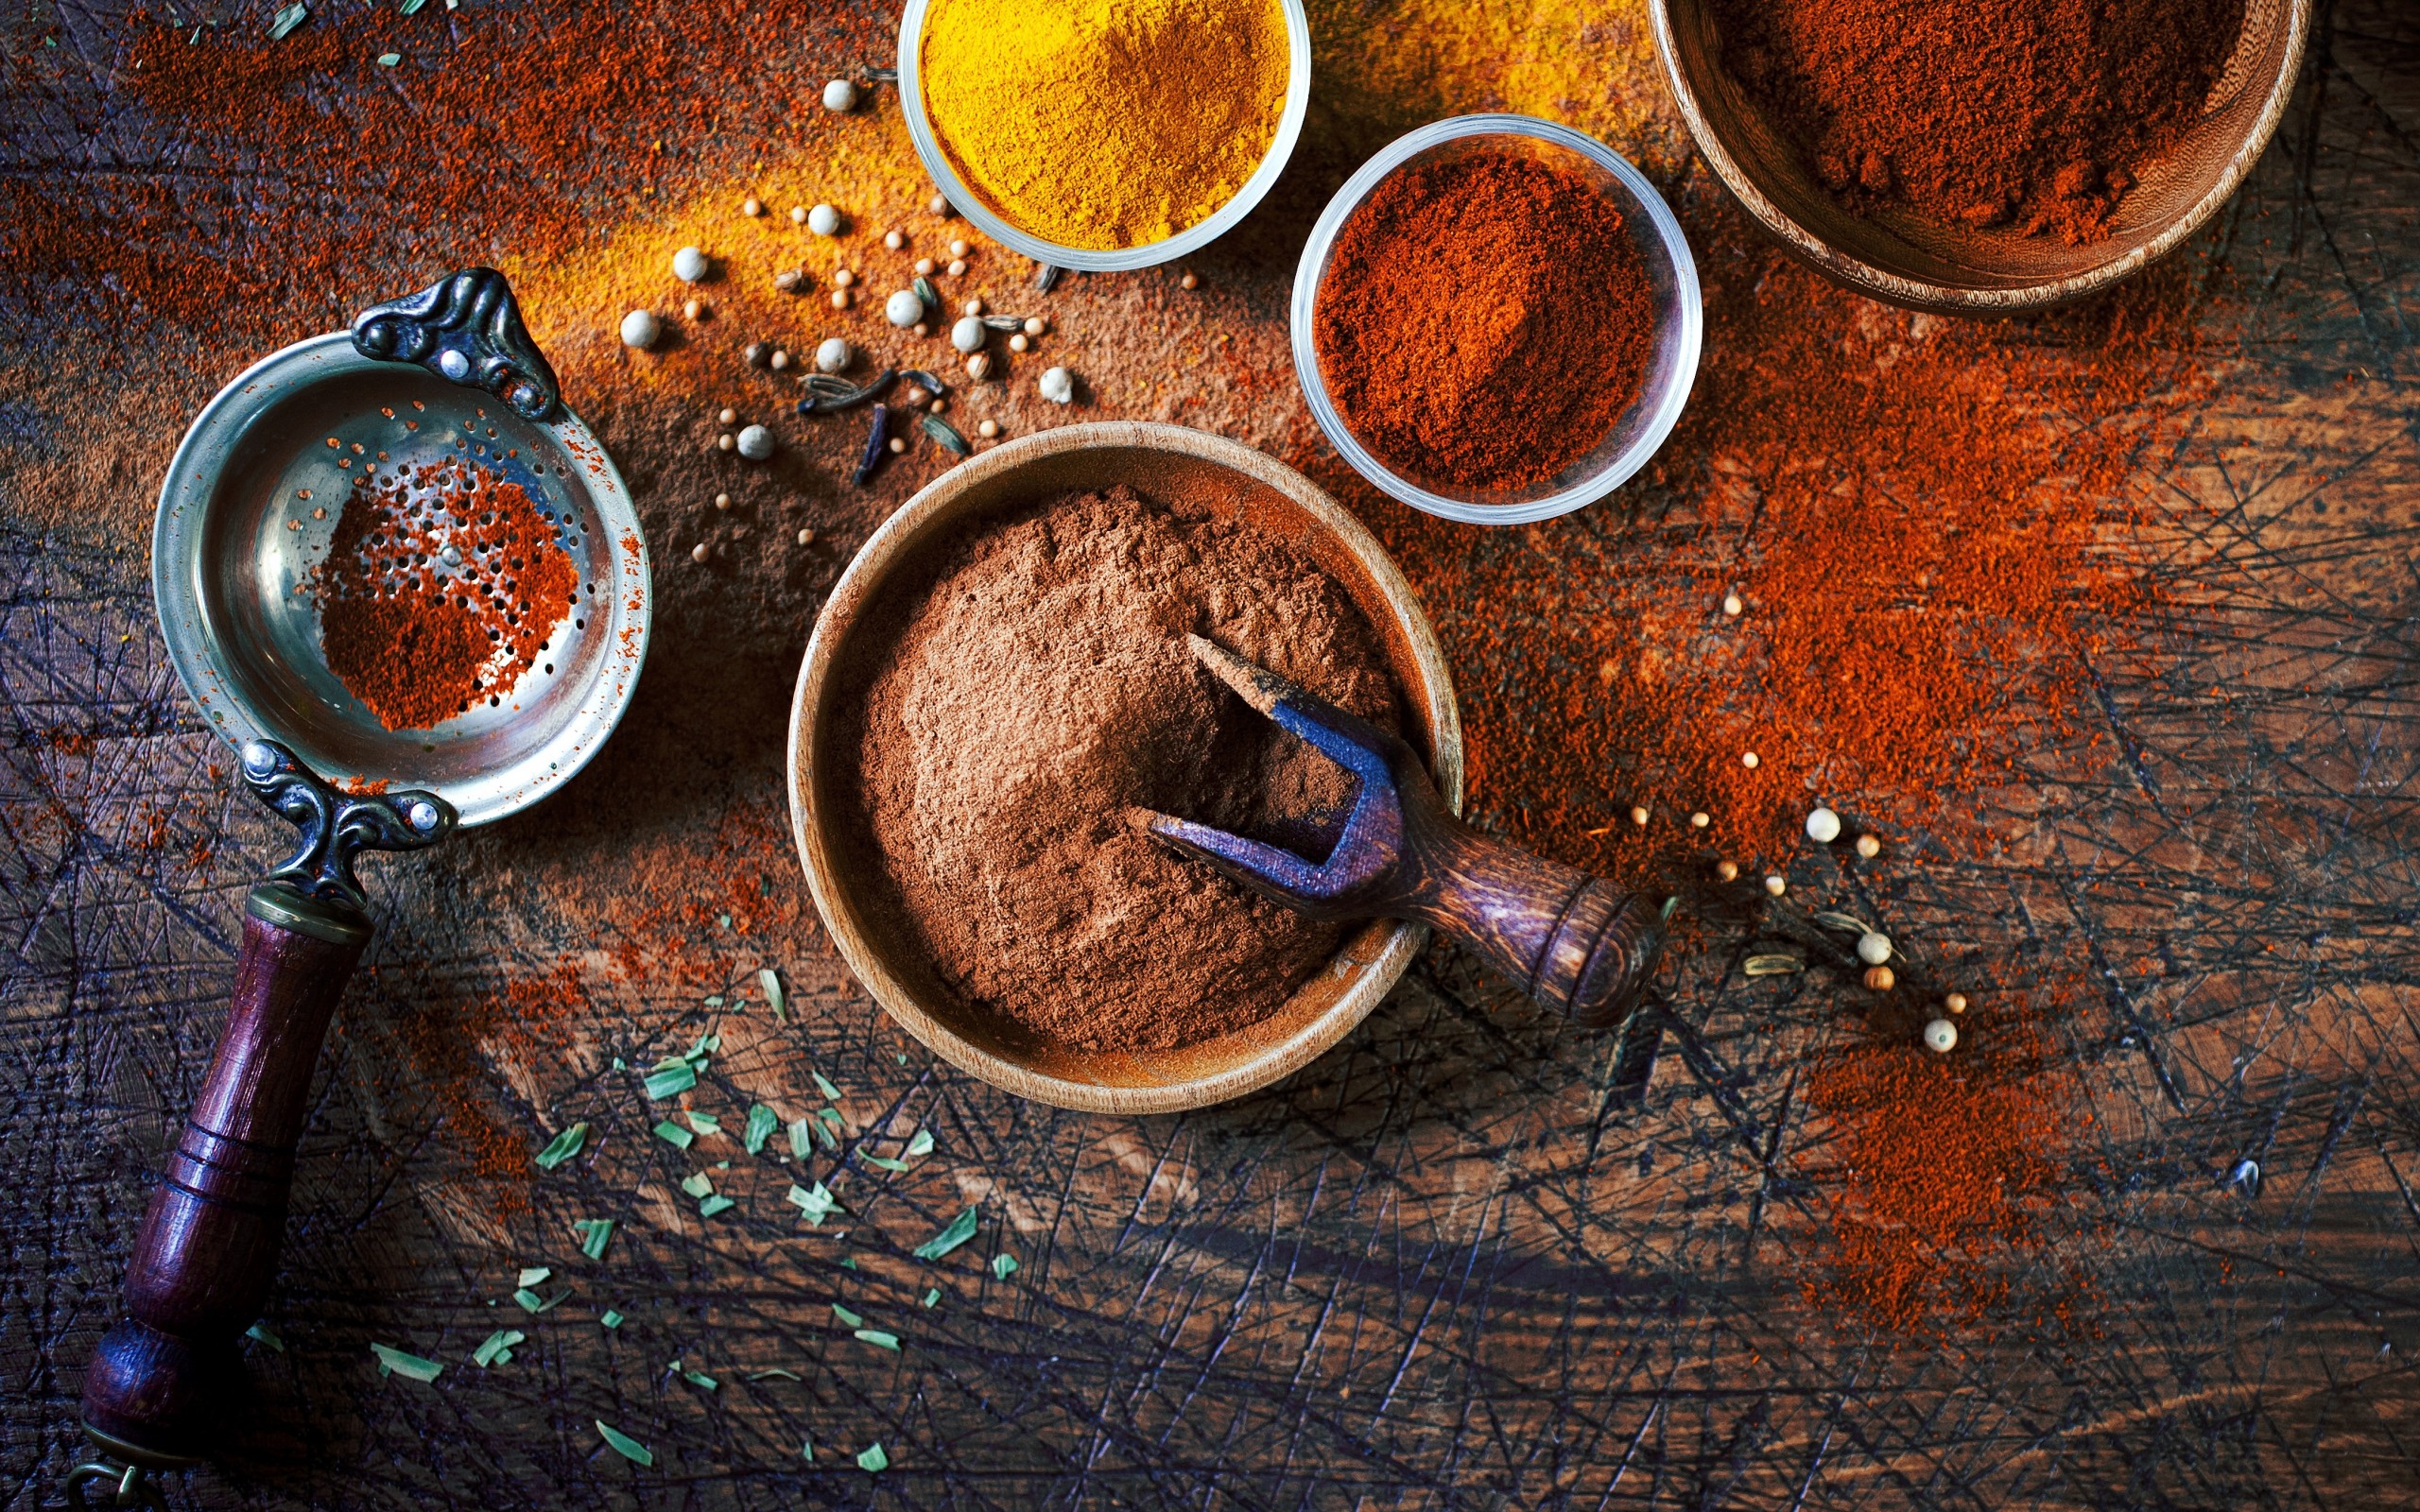 Herbs And Spices Puter Wallpaper Desktop Background